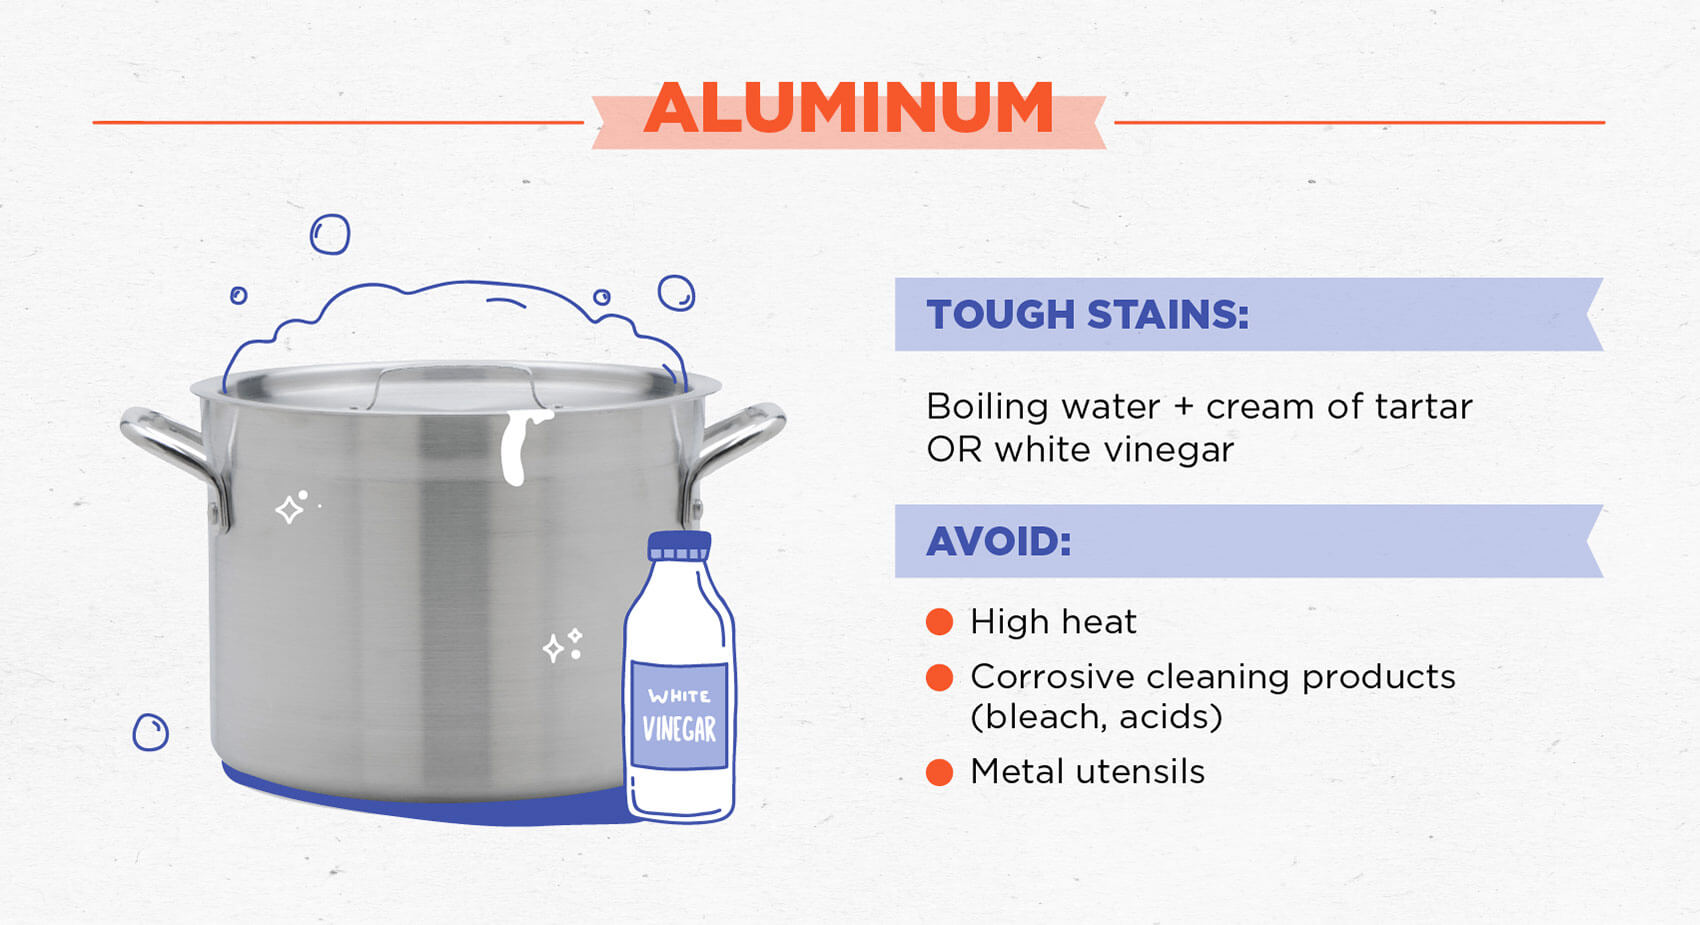 Aluminum pot with white vinegar illustration and cleaning tips.